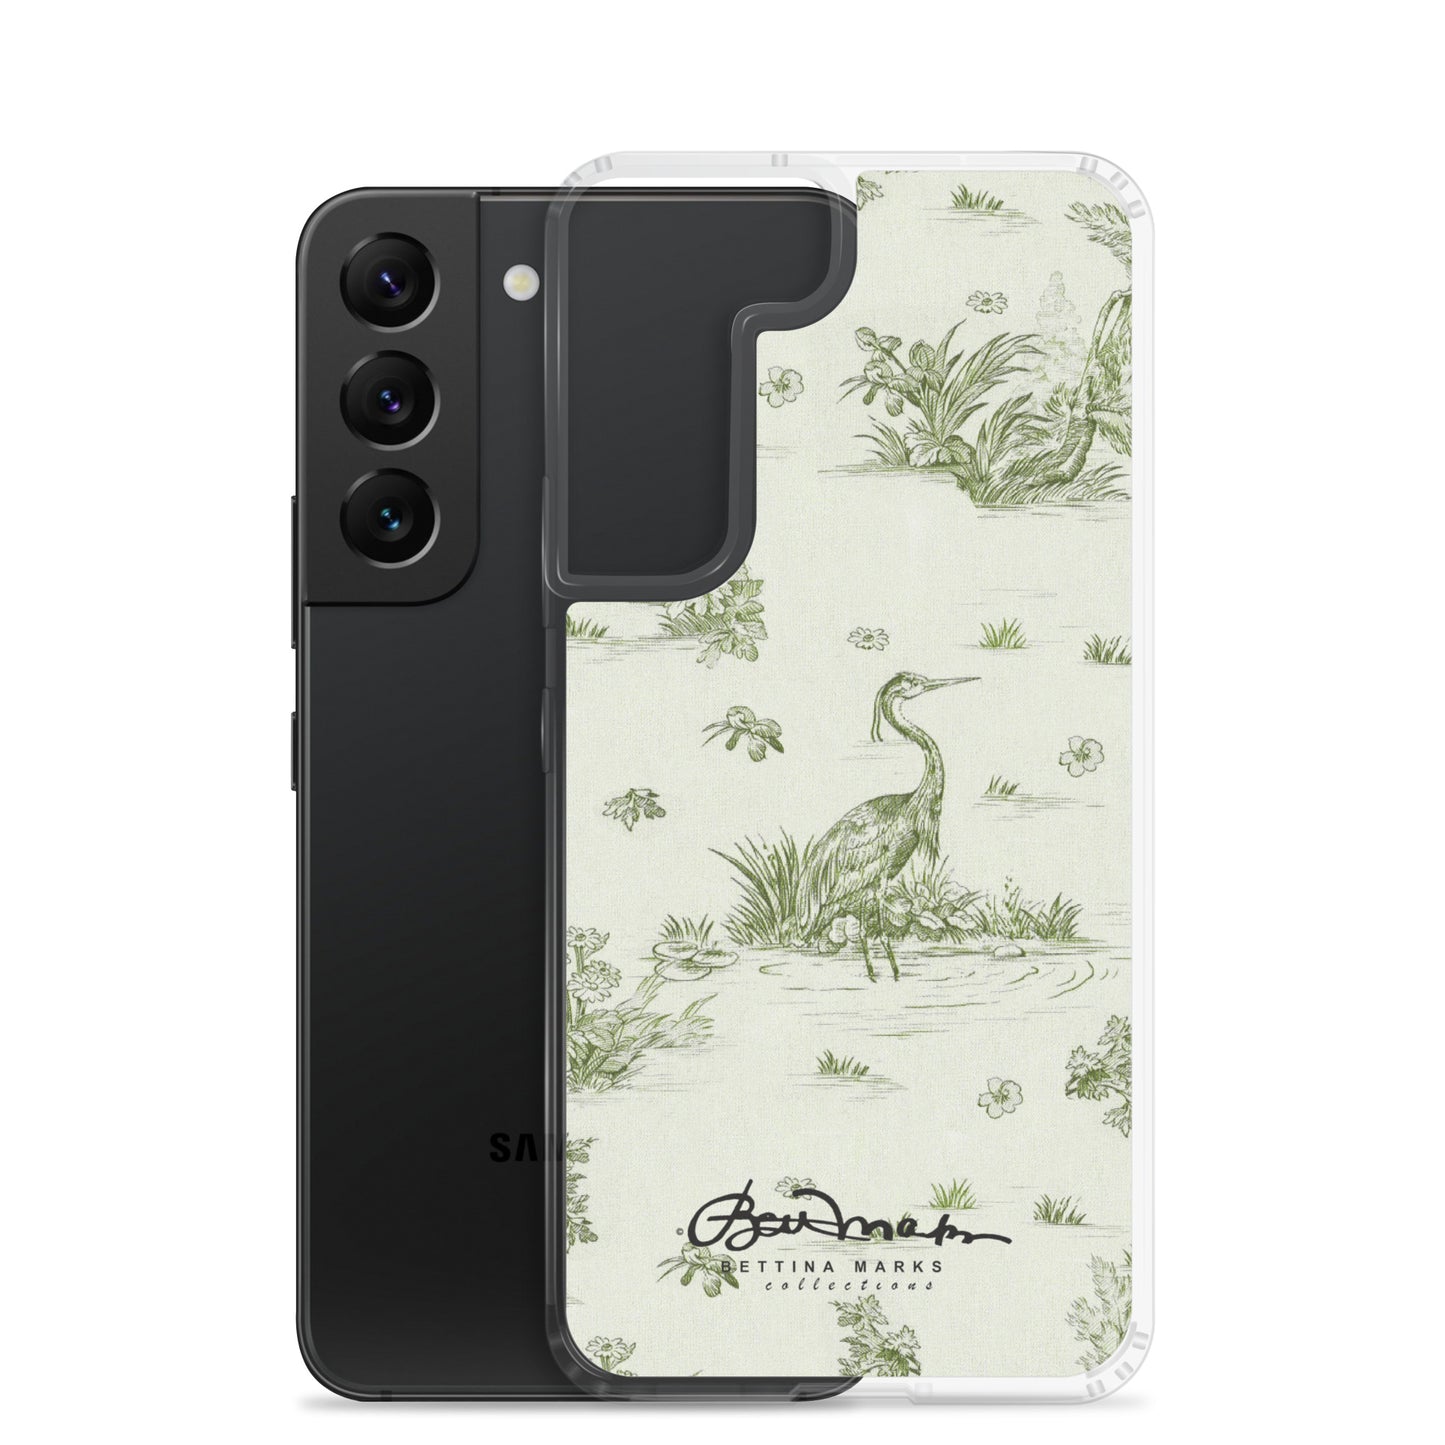 Toiles de Jouy tree Hugging Forest Green Samsung Case (select model)